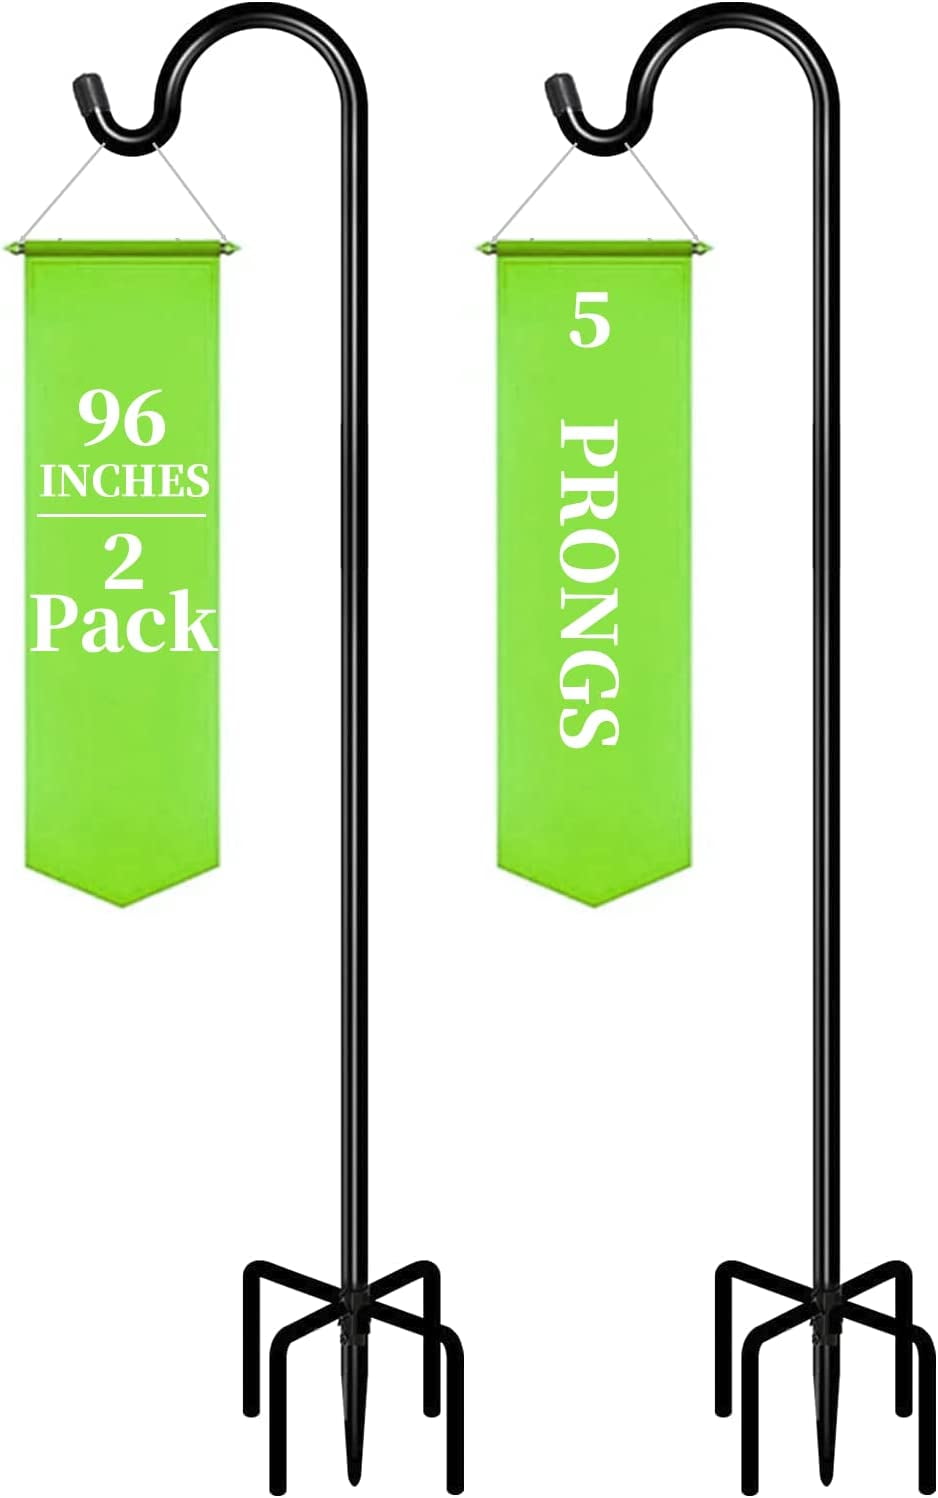 CINSOYEE Shepherd Hook with Dual Hook，96 Inches 3/5 Thickness Adjustable Hanging Stake for Birder Feeder Solar Light Plant Hanger Wedding Décor 96 Inches 2 Pack 